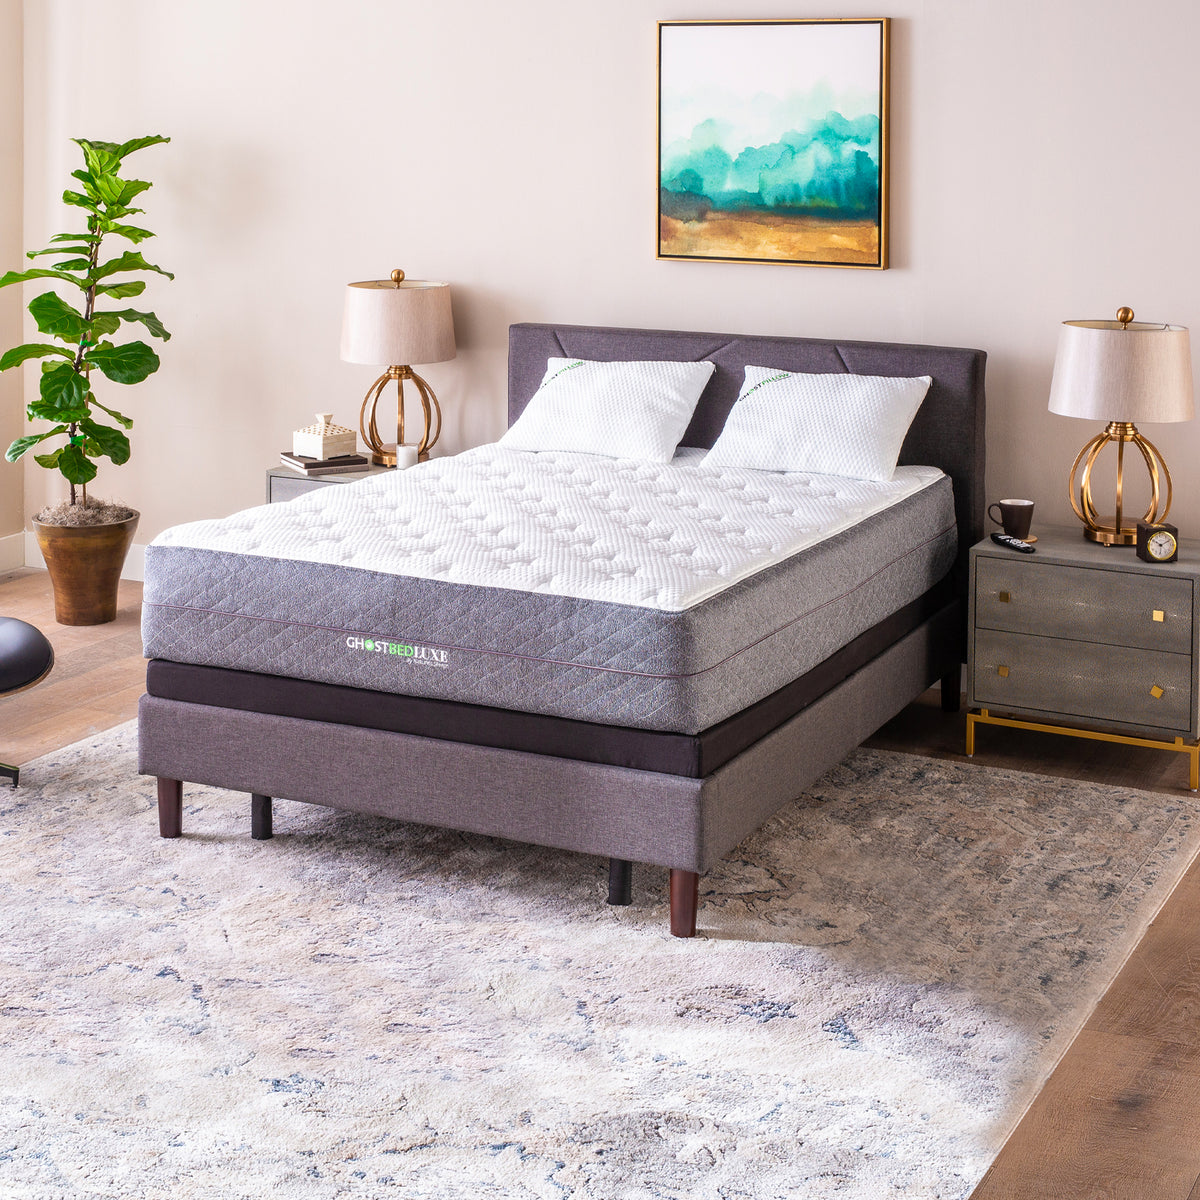 Vertrouwelijk lotus koppel GhostBed Luxe Mattress: The Coolest Bed in the World™ | GhostBed®